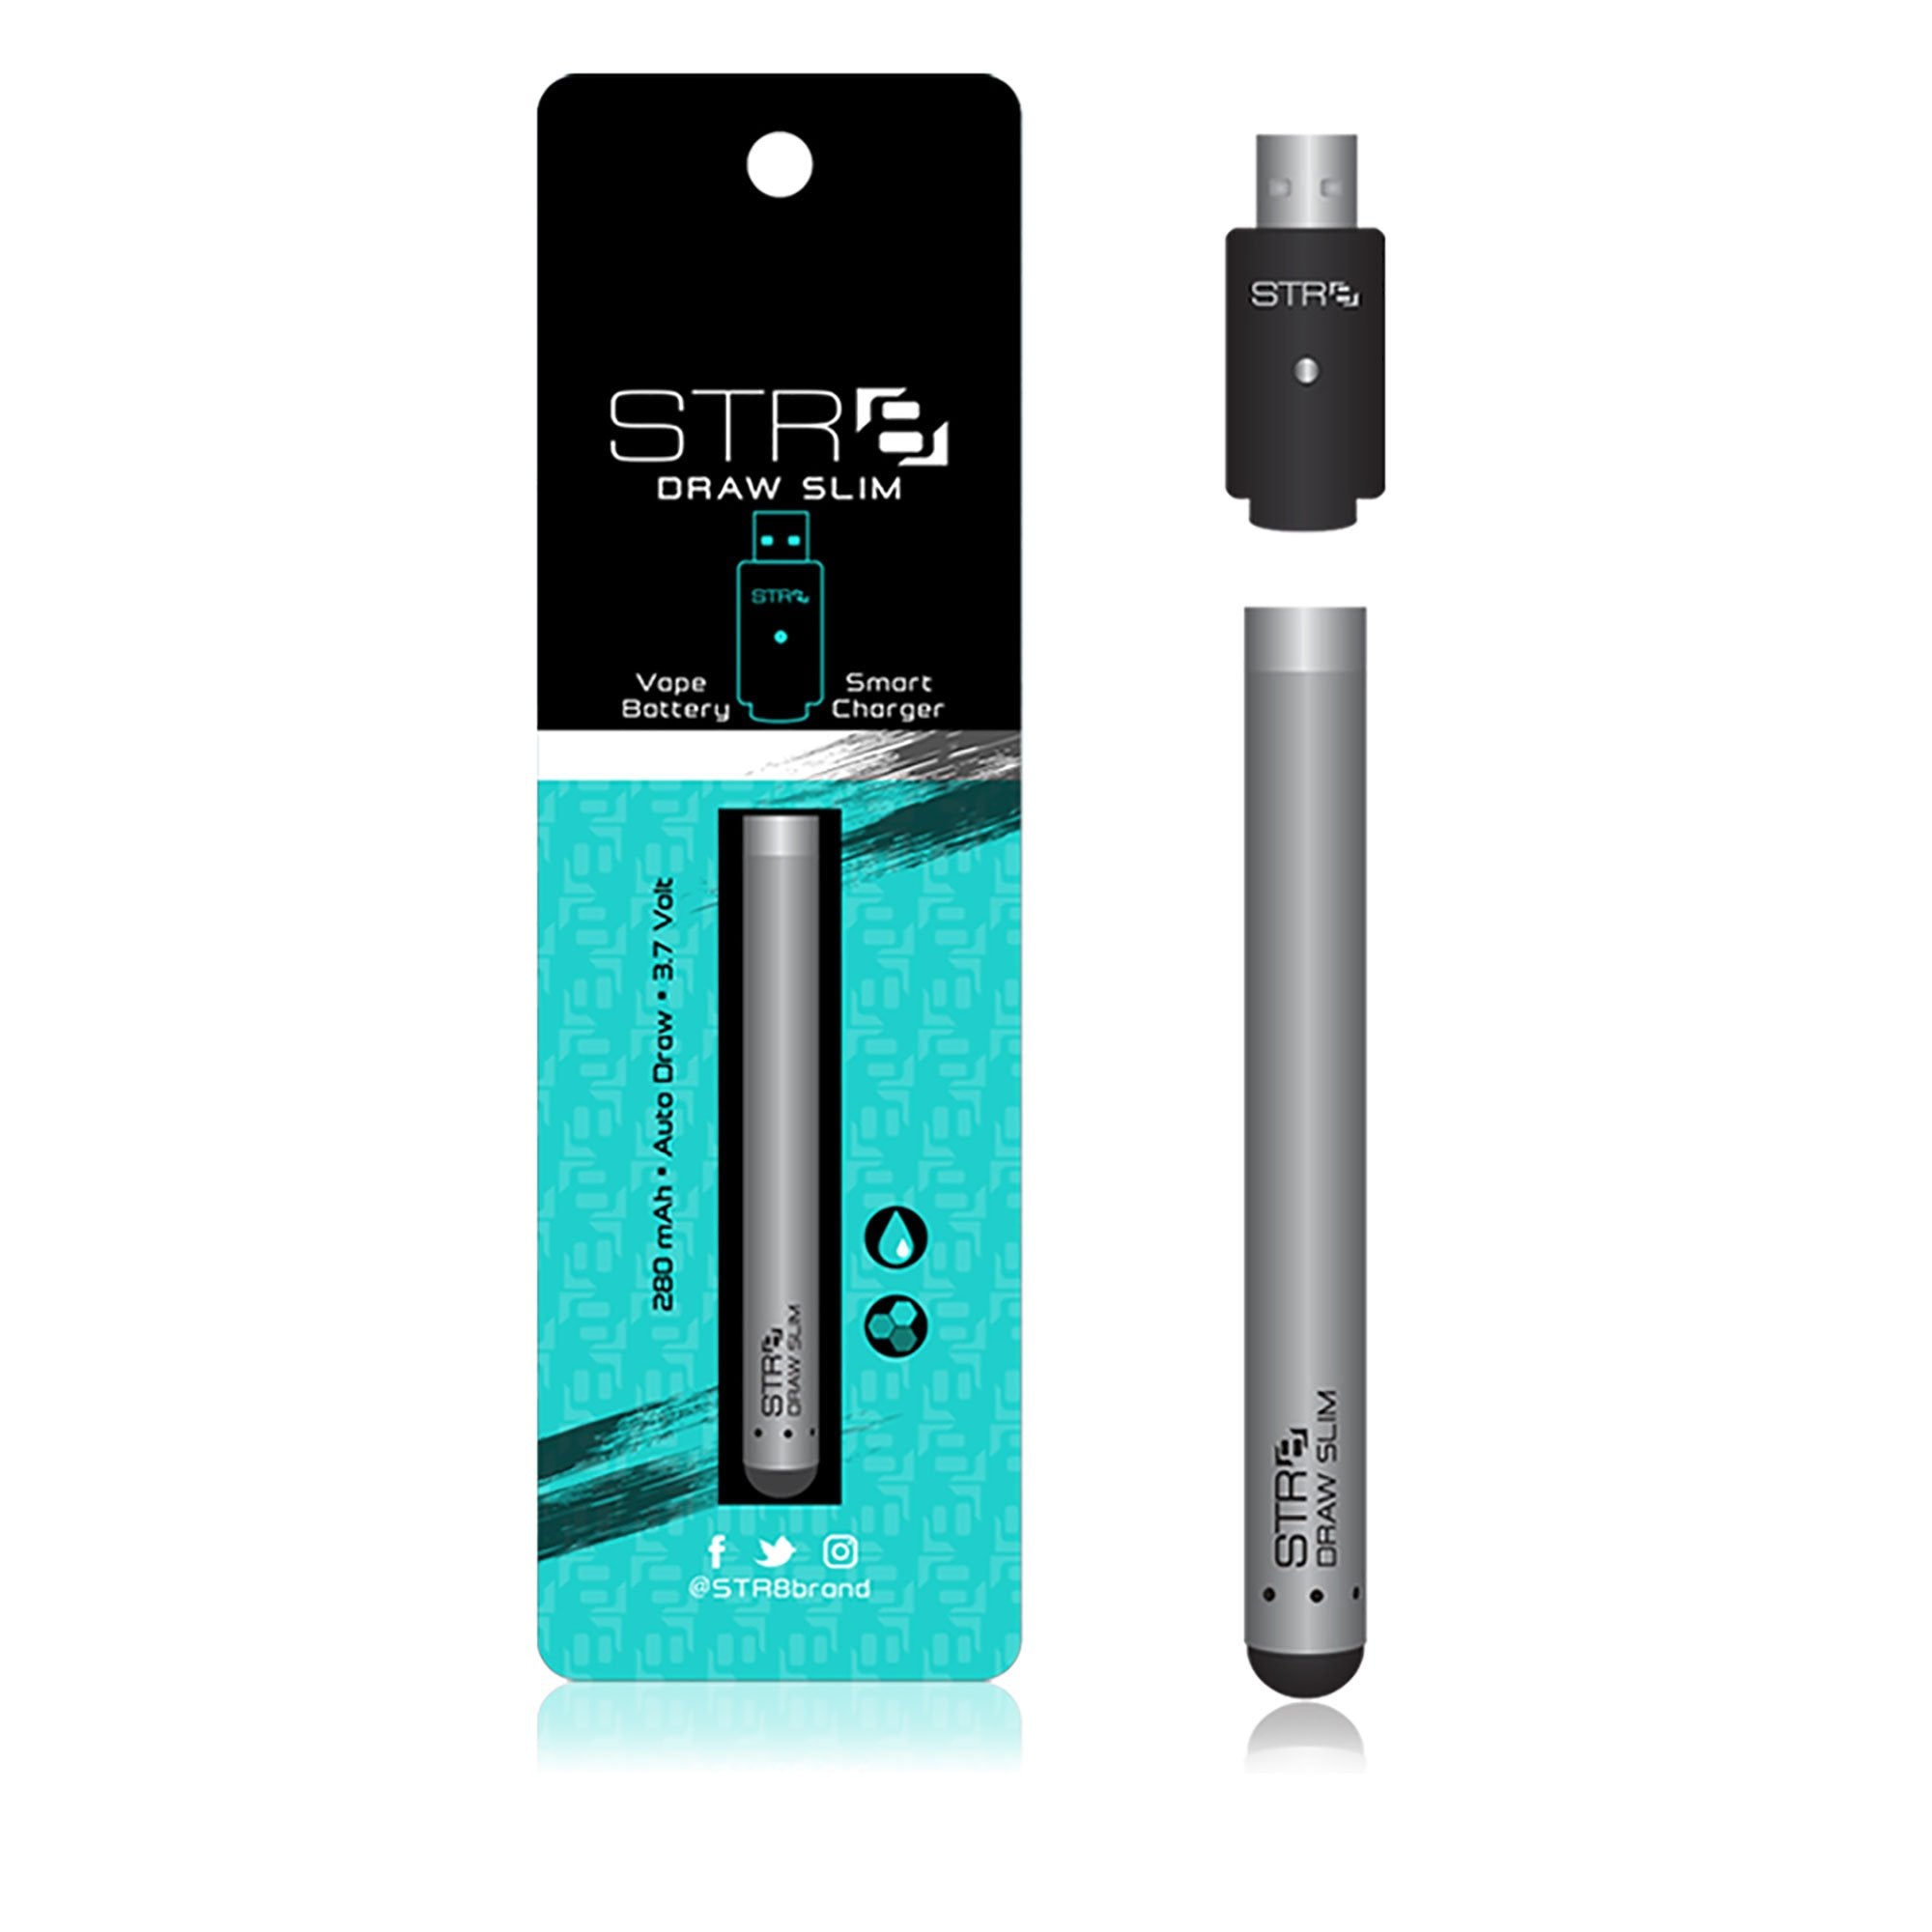 STR8 | Auto Draw Slim Vape Batteries with Charger | 280 mAh - Silver- 10 Count - 2